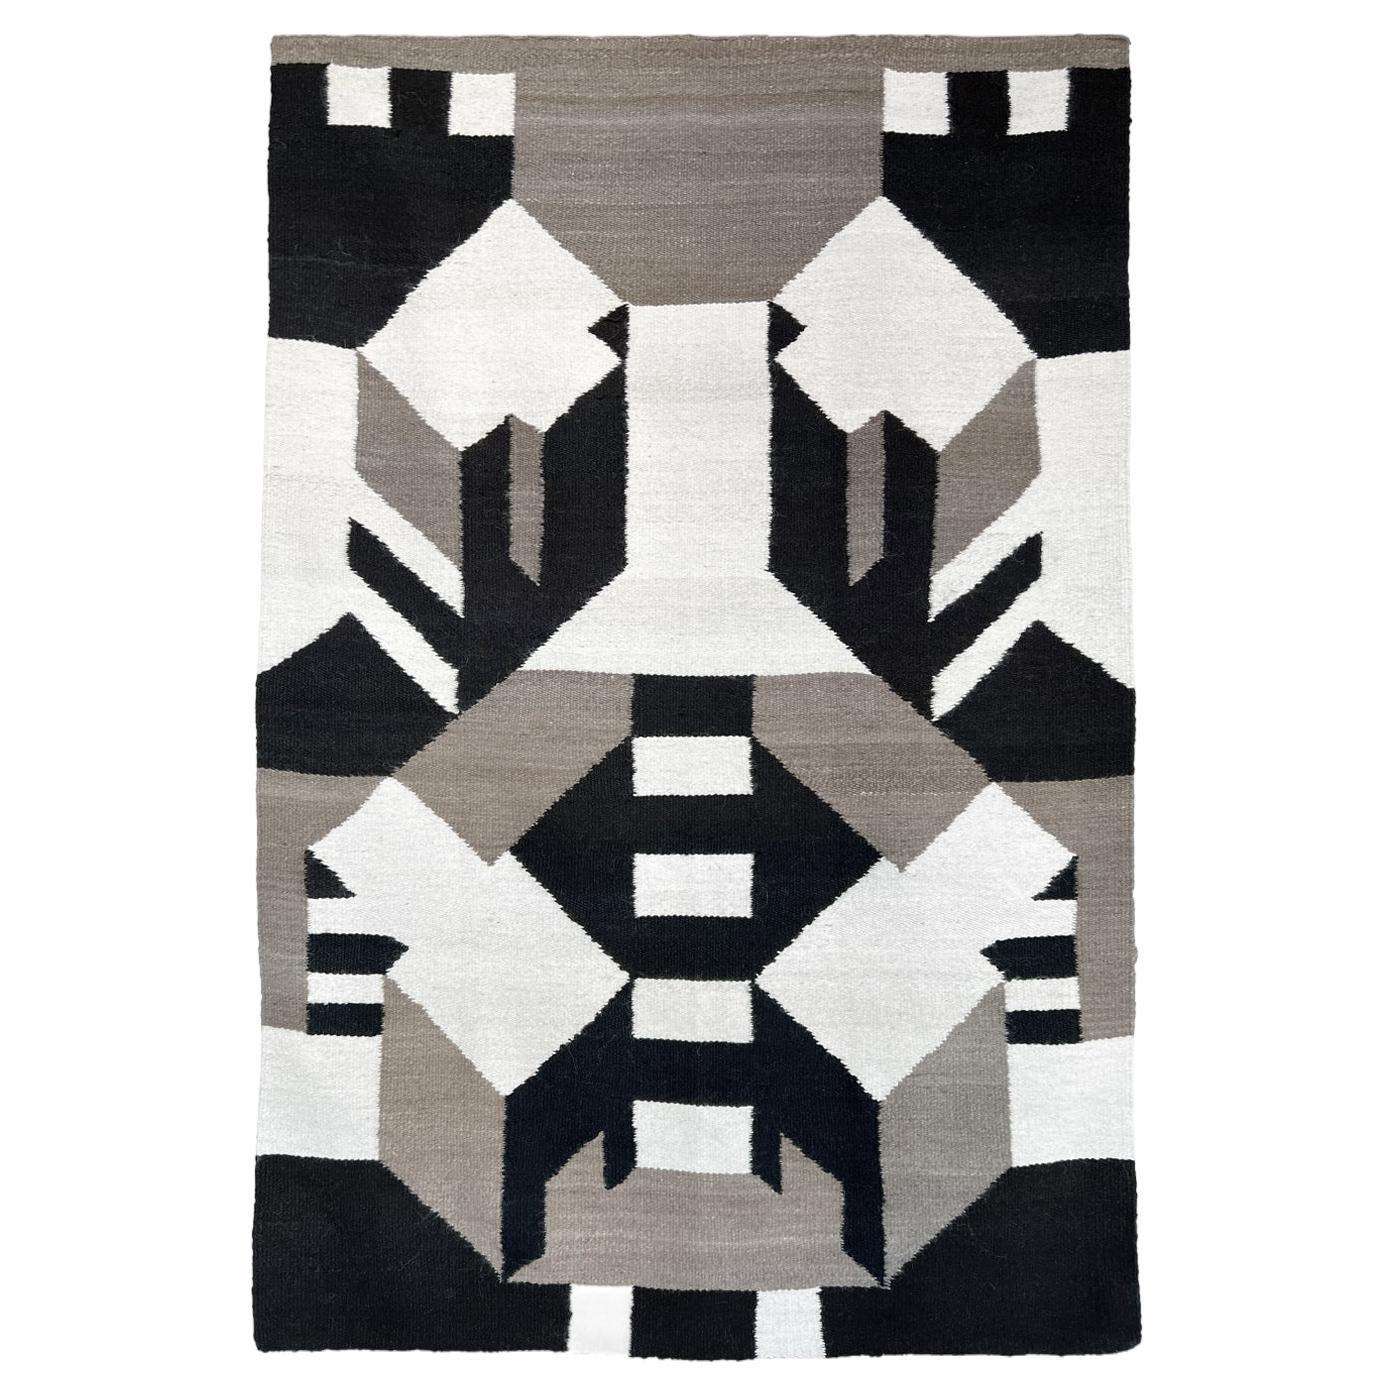 Hand-woven wool rug "Flattened City B" by Maria Sanchez